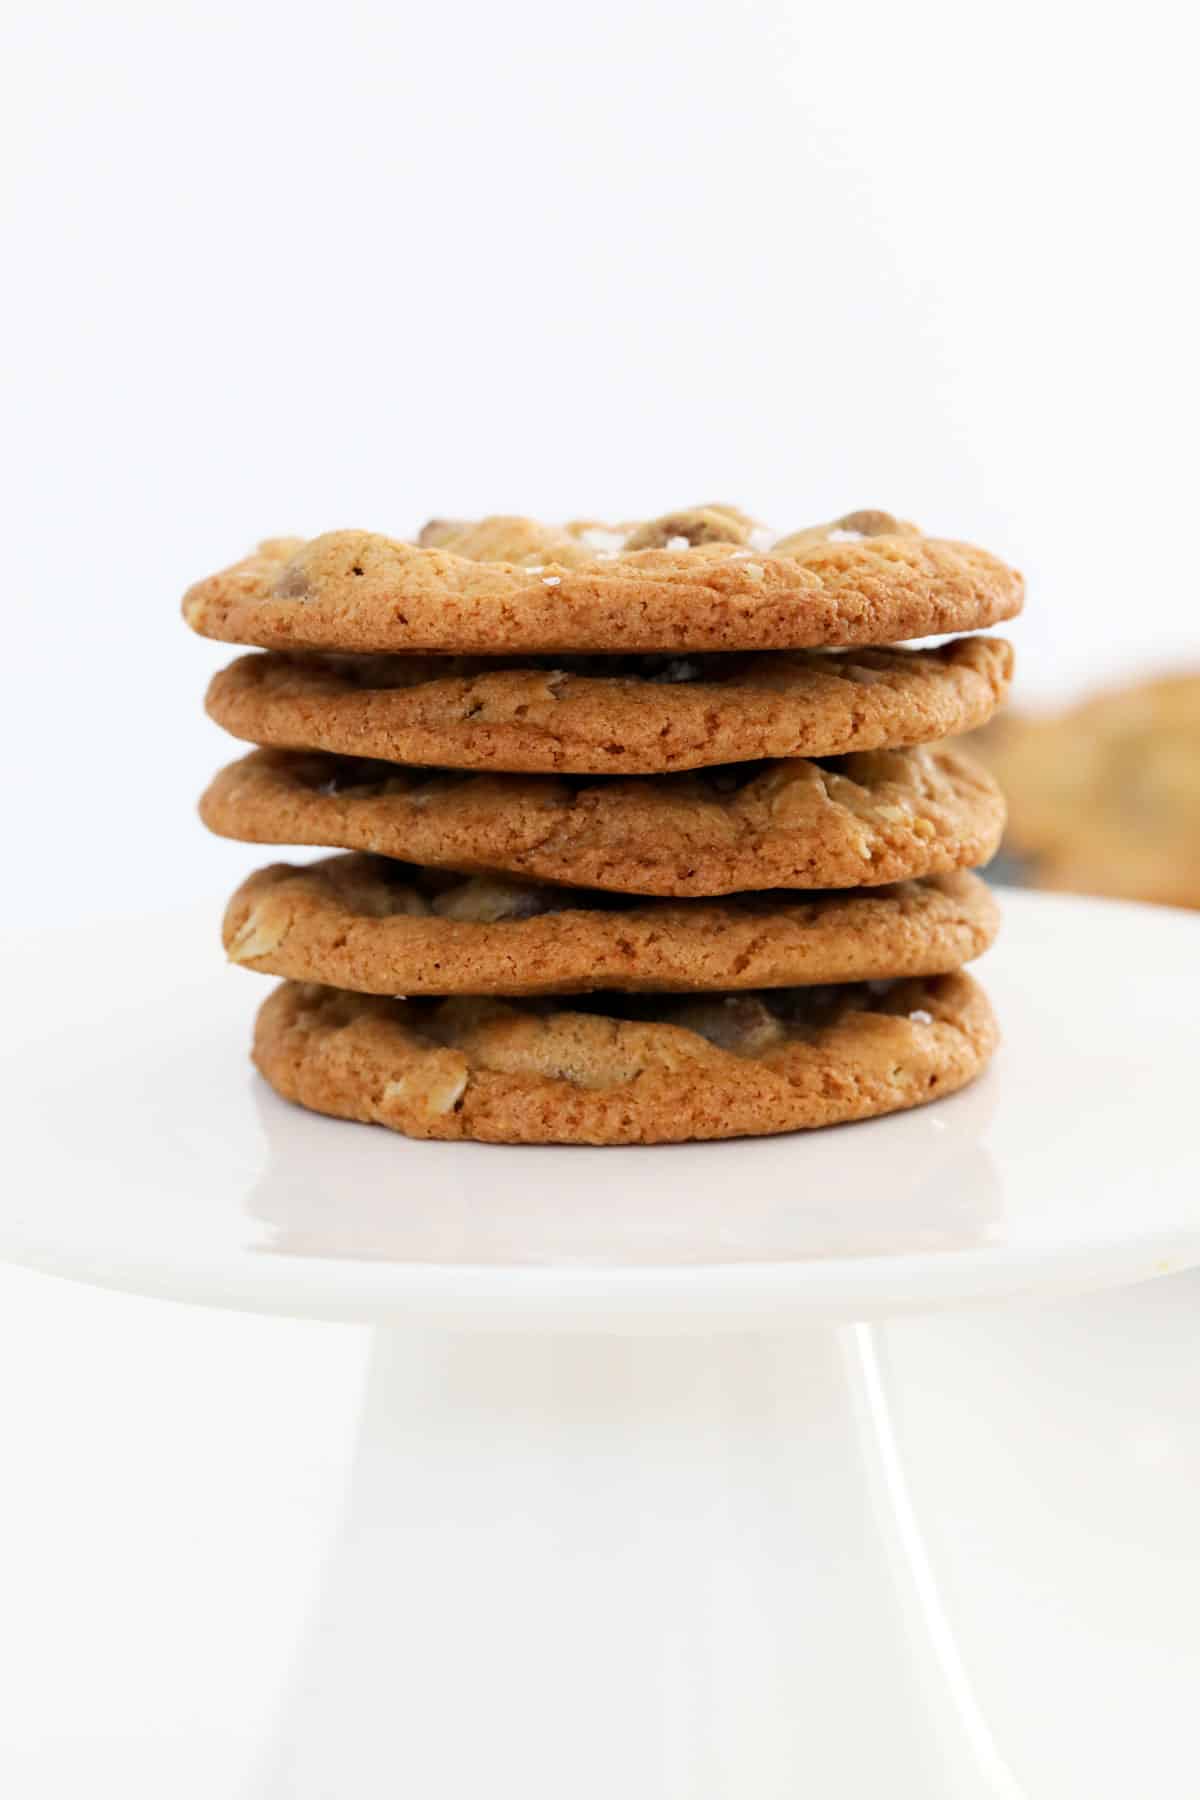 A stack of oatmeal cookies on a white stand.